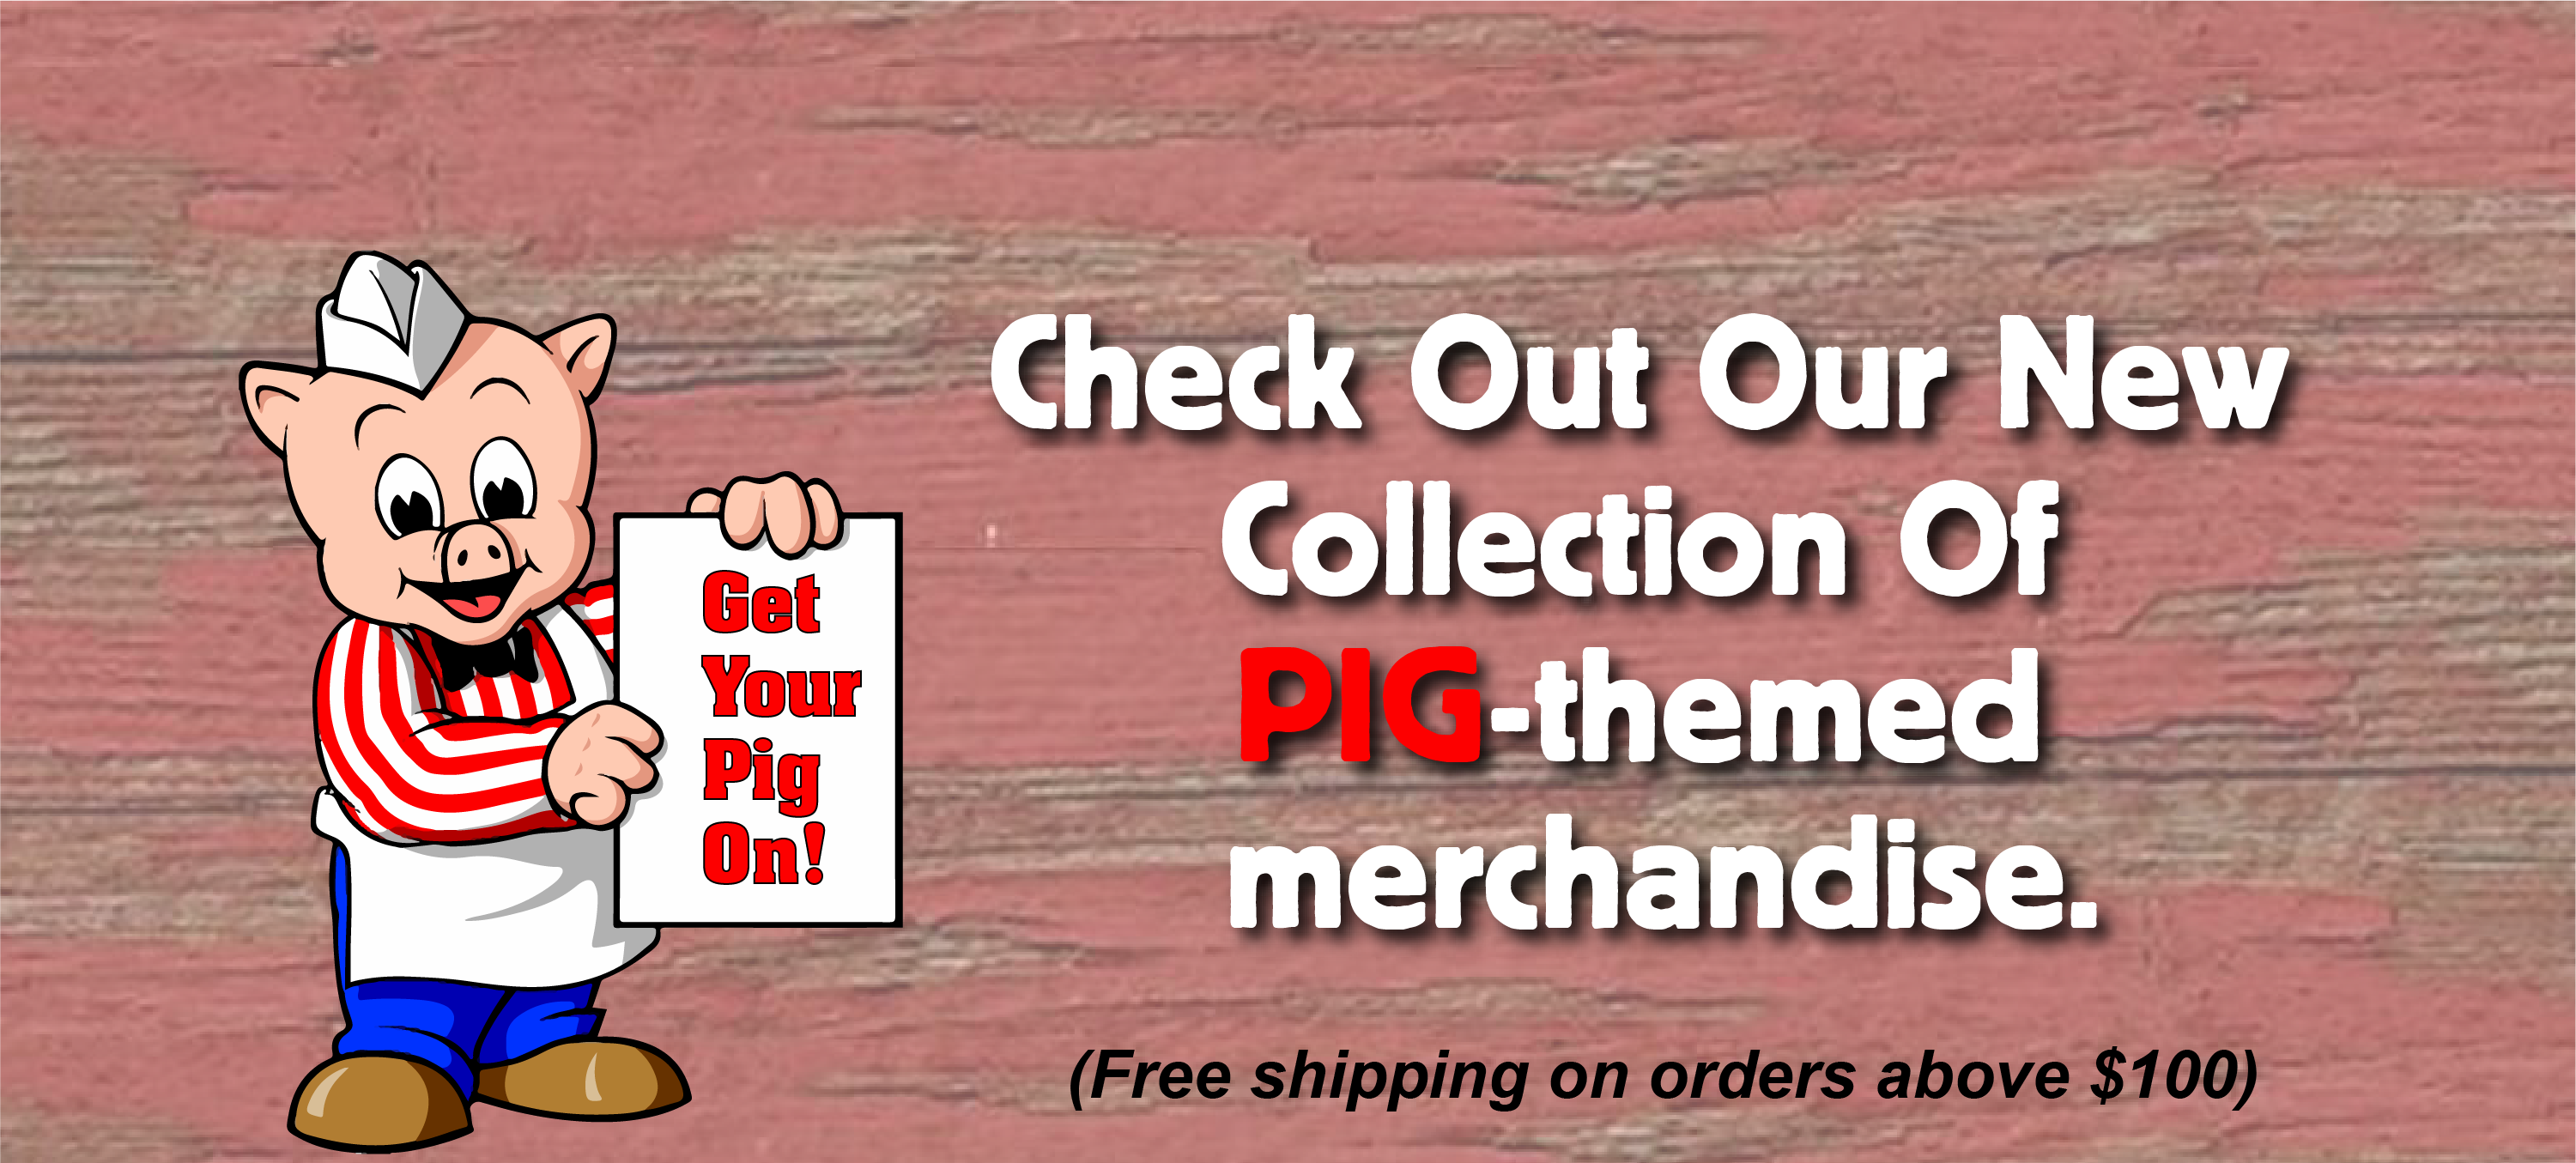 Piggly Wiggly Merchandise